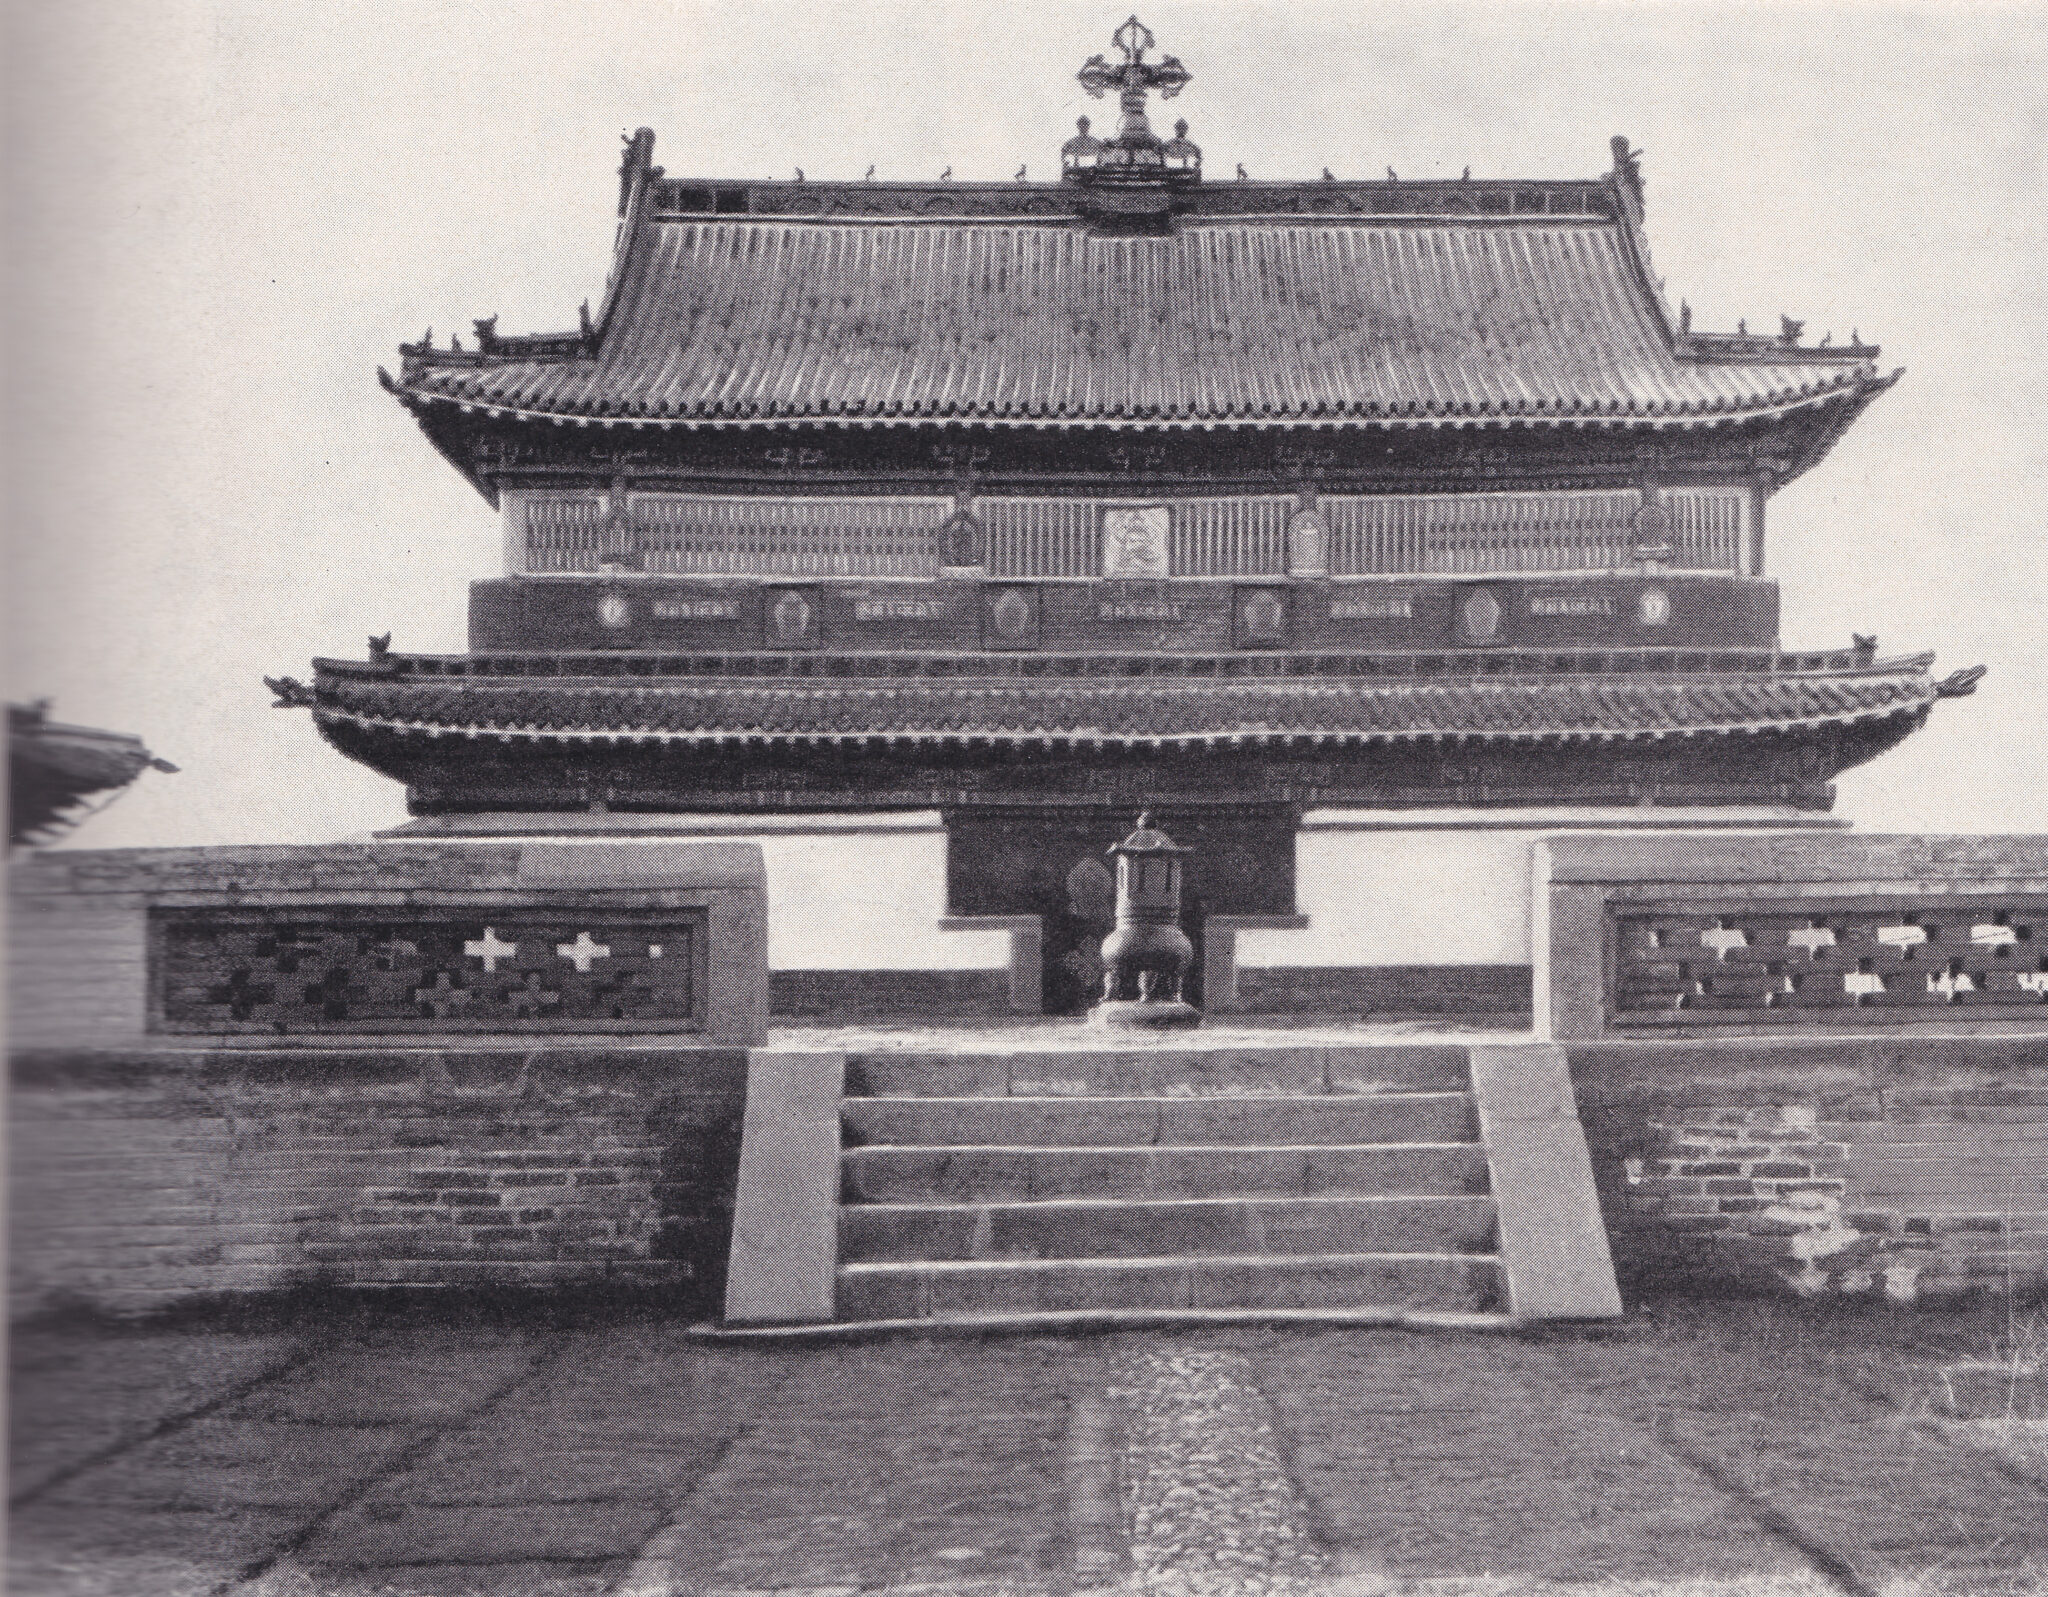 Black and white photograph of temple featuring tiered, pitched rooflines and crossed vajra at top